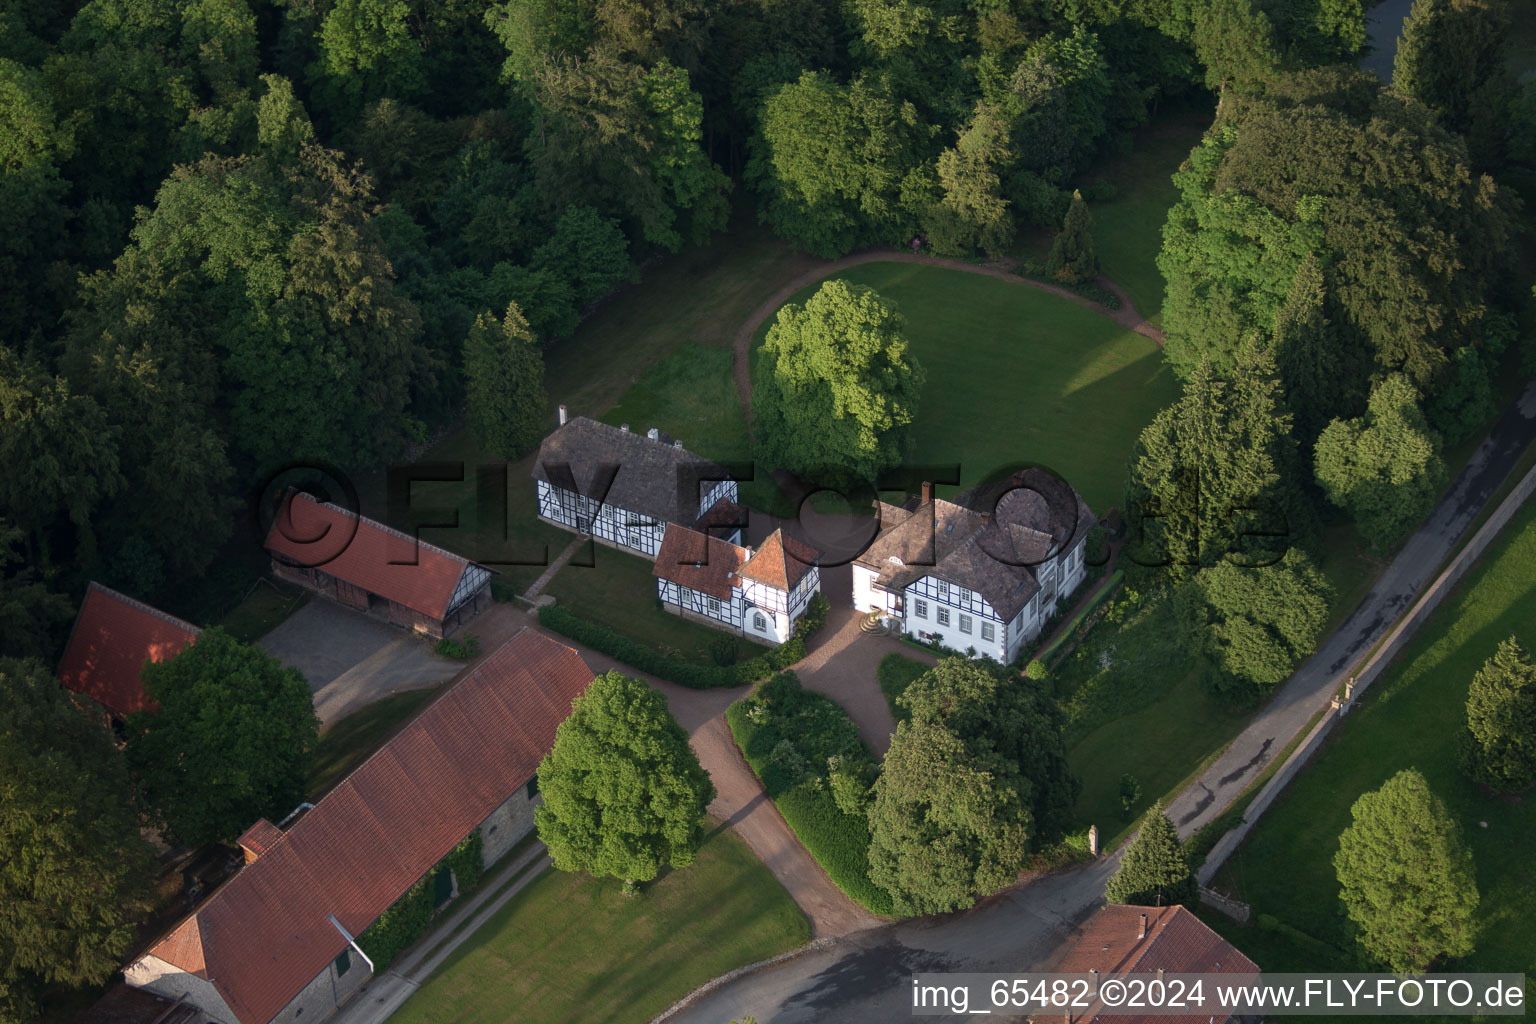 Aerial photograpy of Farm on the edge of cultivated fields in the district Abbenburg in Brakel in the state North Rhine-Westphalia